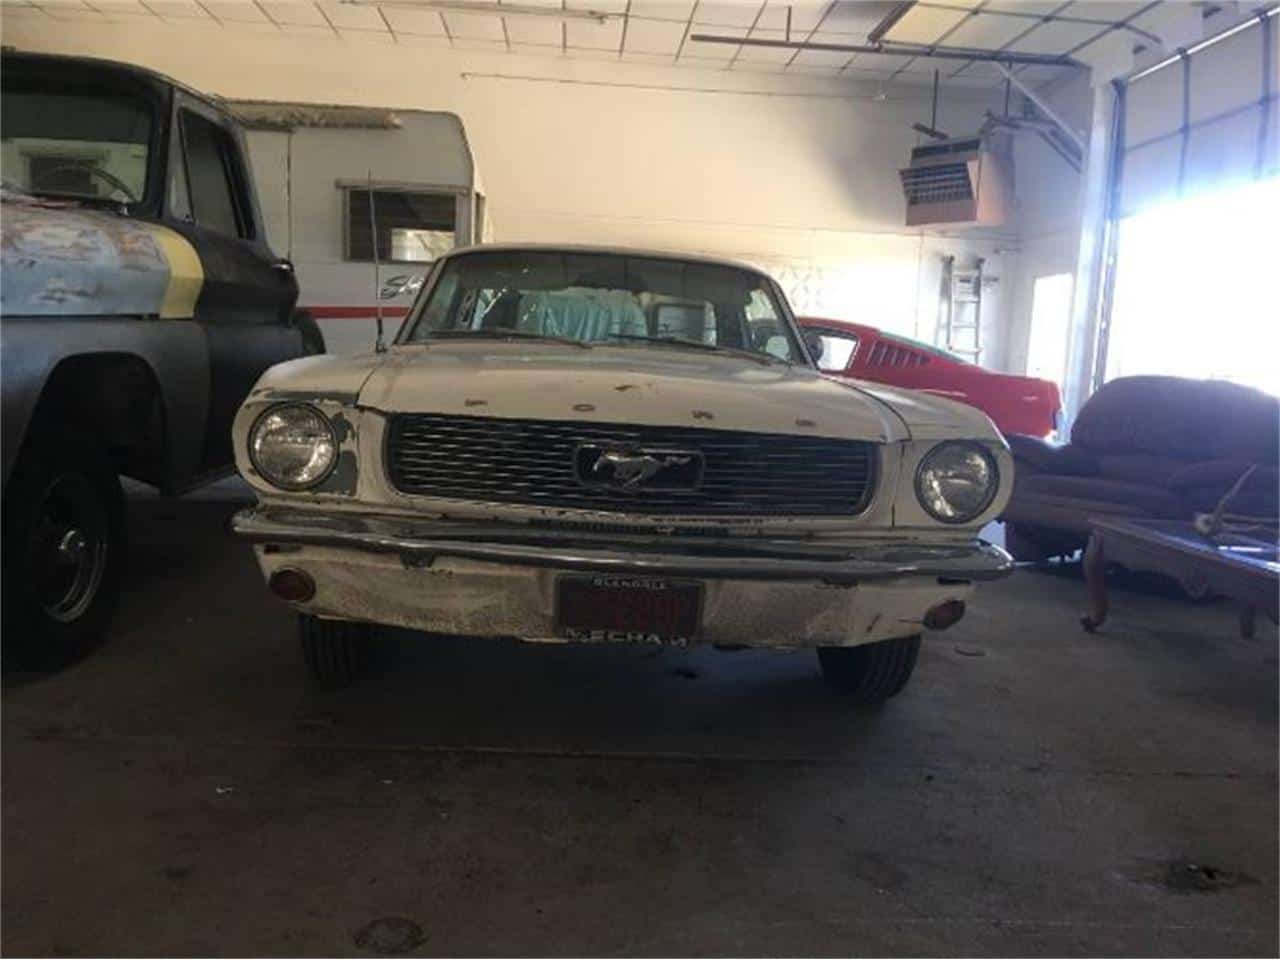 1965 ford mustang, Pick of the Day: 1965 Ford Mustang, a great project car, ClassicCars.com Journal